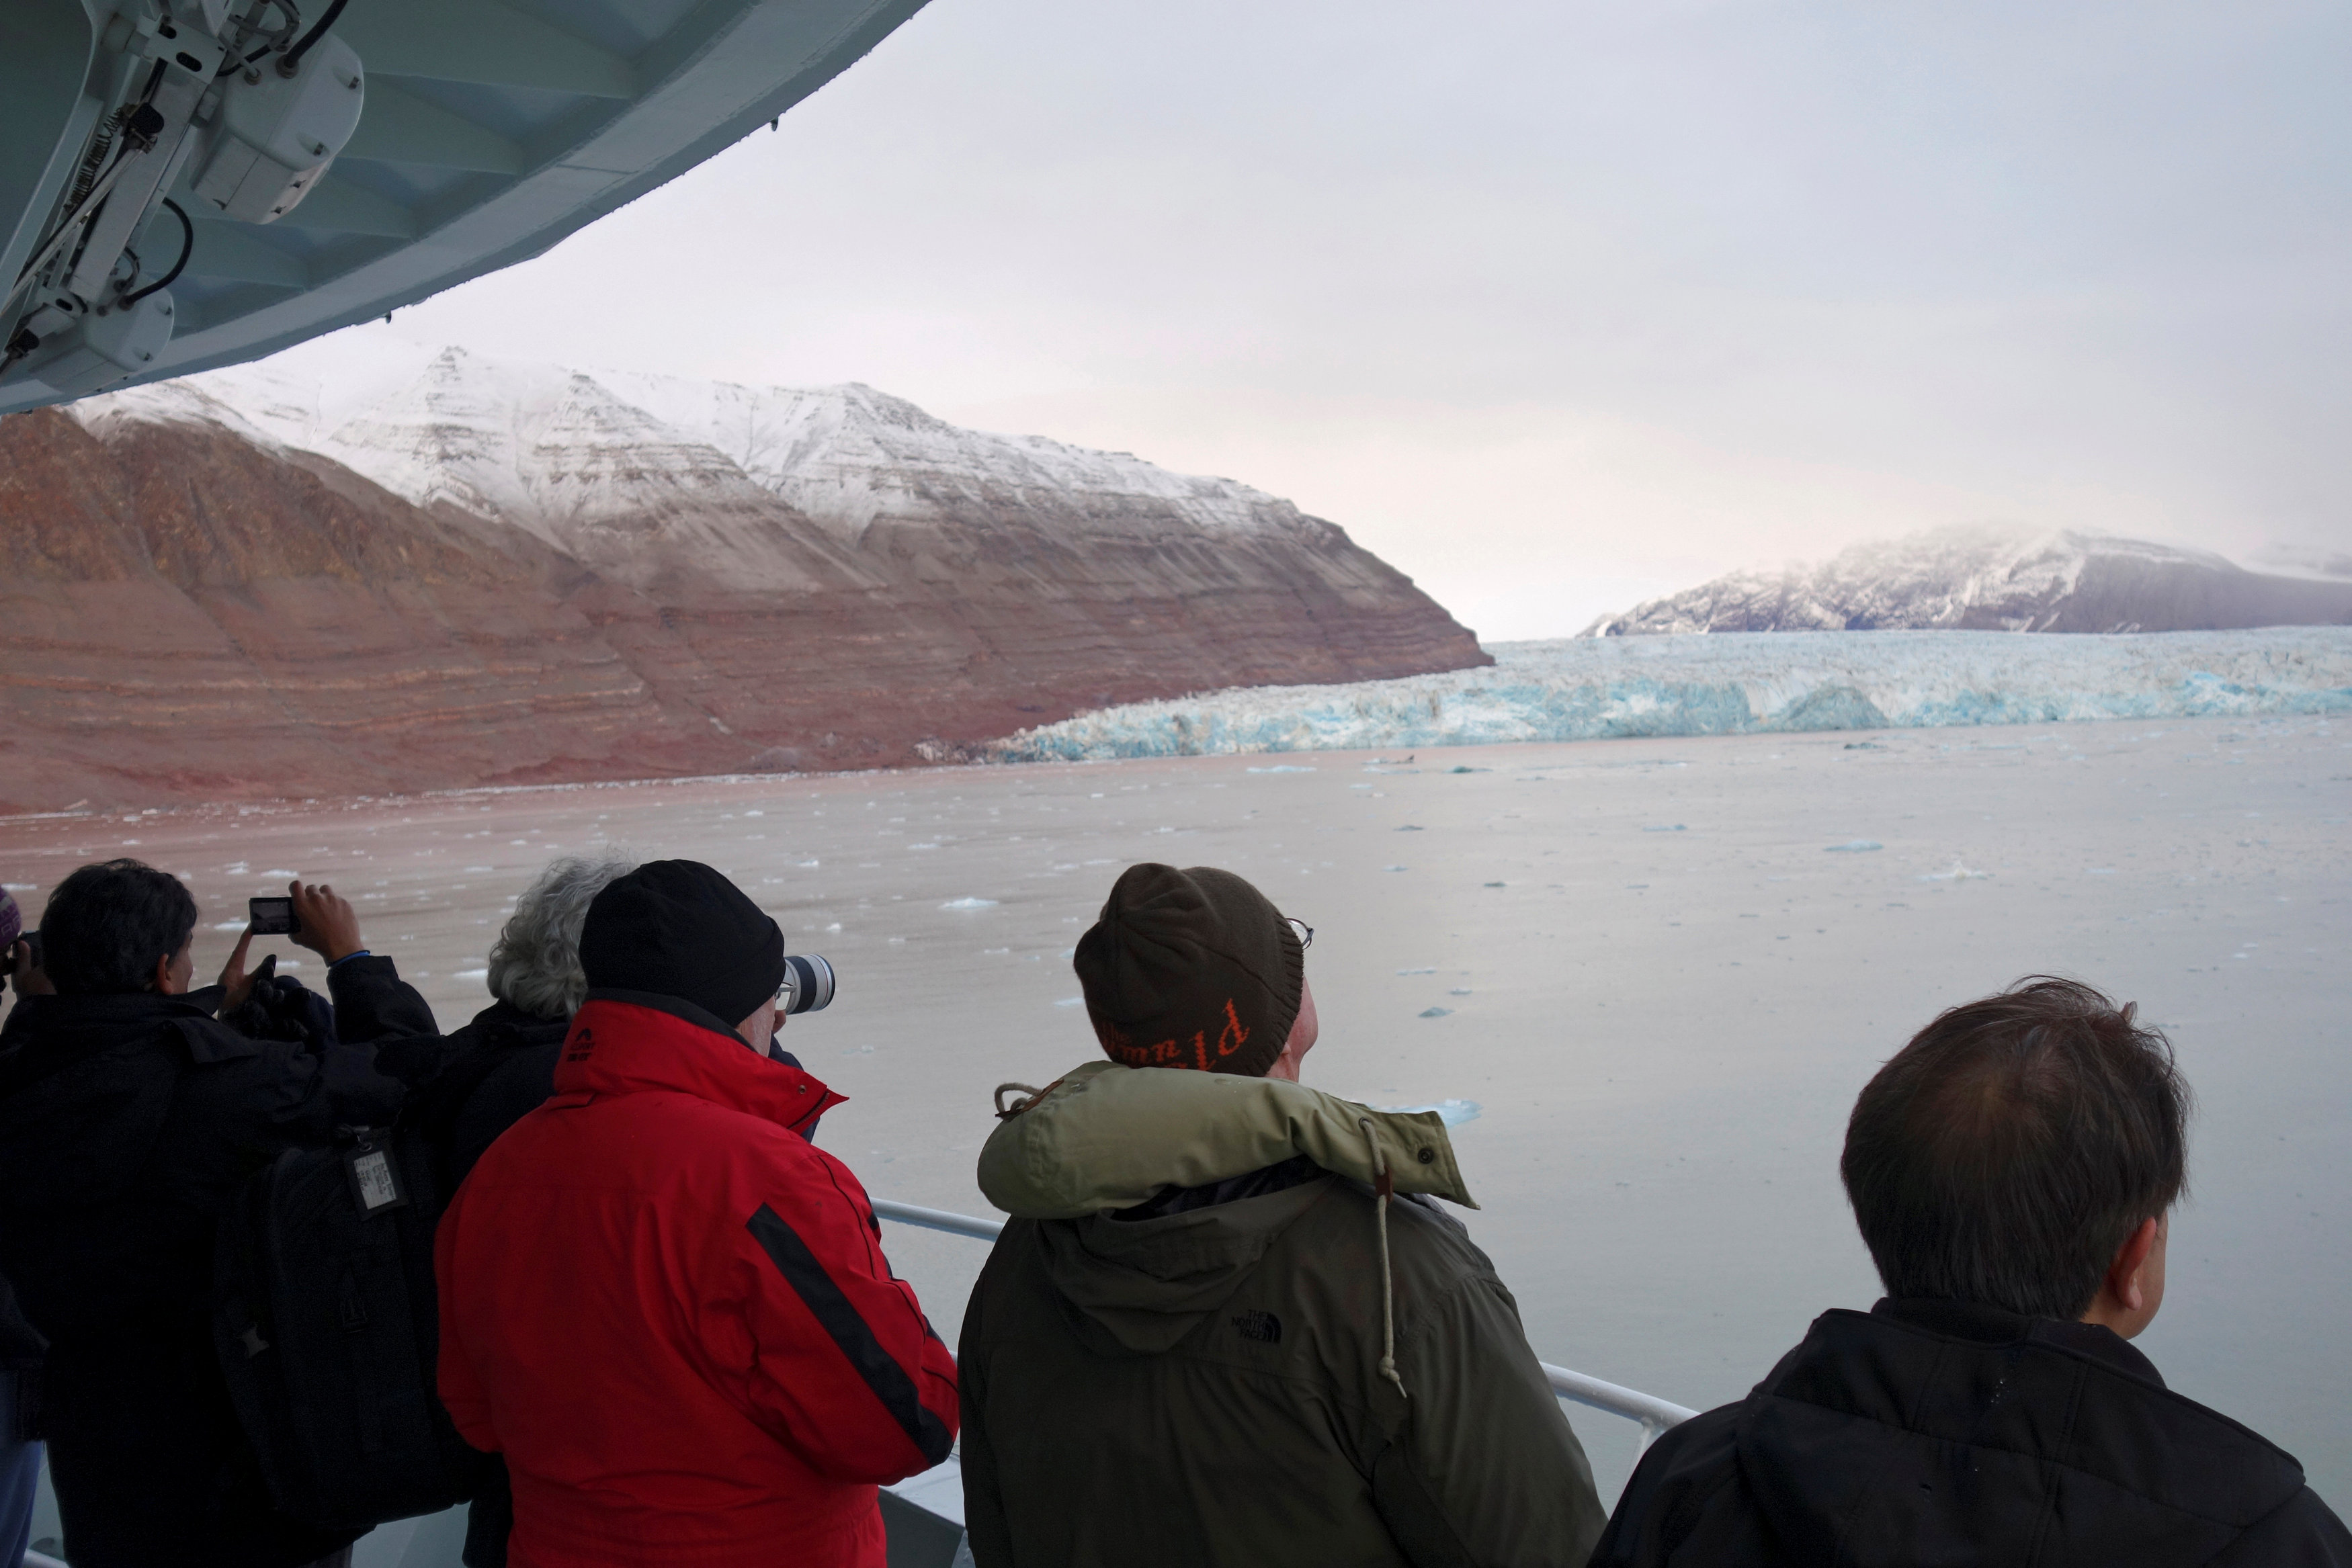 Visitors take pictures of a glacier in the Kongsfjorden fjord from onboard the Polarsyssel, the ship of the Governor of Svalbard, in the Arctic archipelago of Svalbard, Norway, September 20, 2016. Picture taken September 20, 2016. (Gwladys Fouche / Reuters)